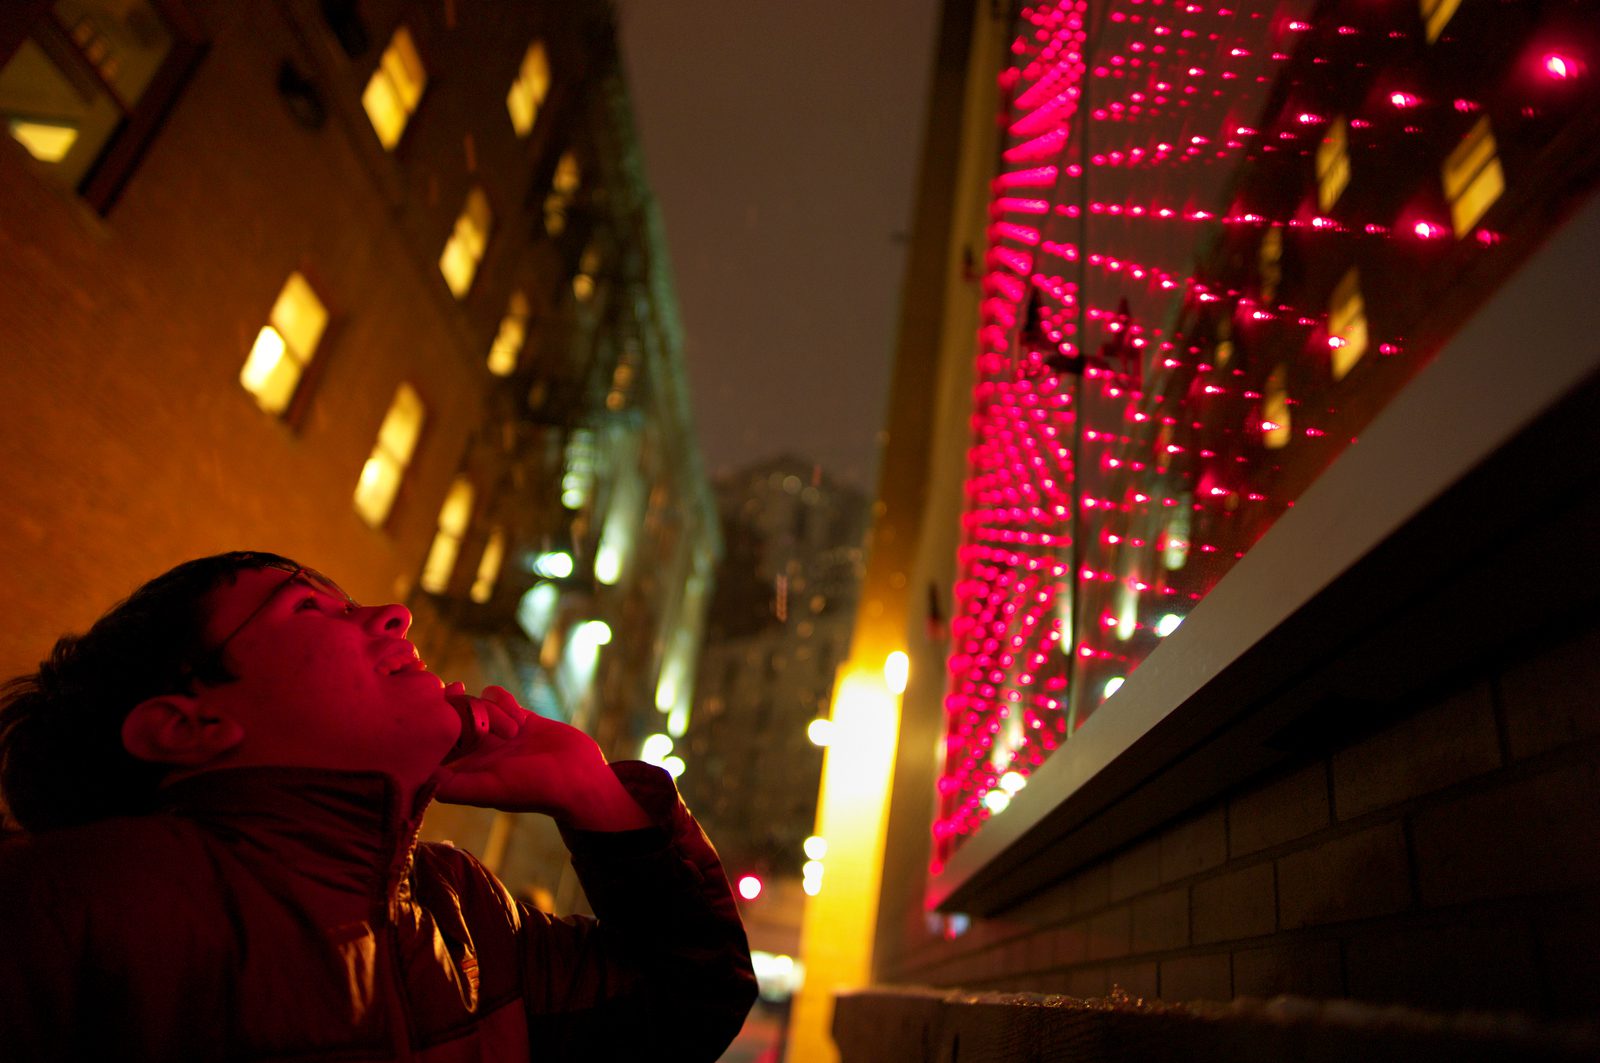 man looking at a light art installation in the cultural district of pittsburgh at night